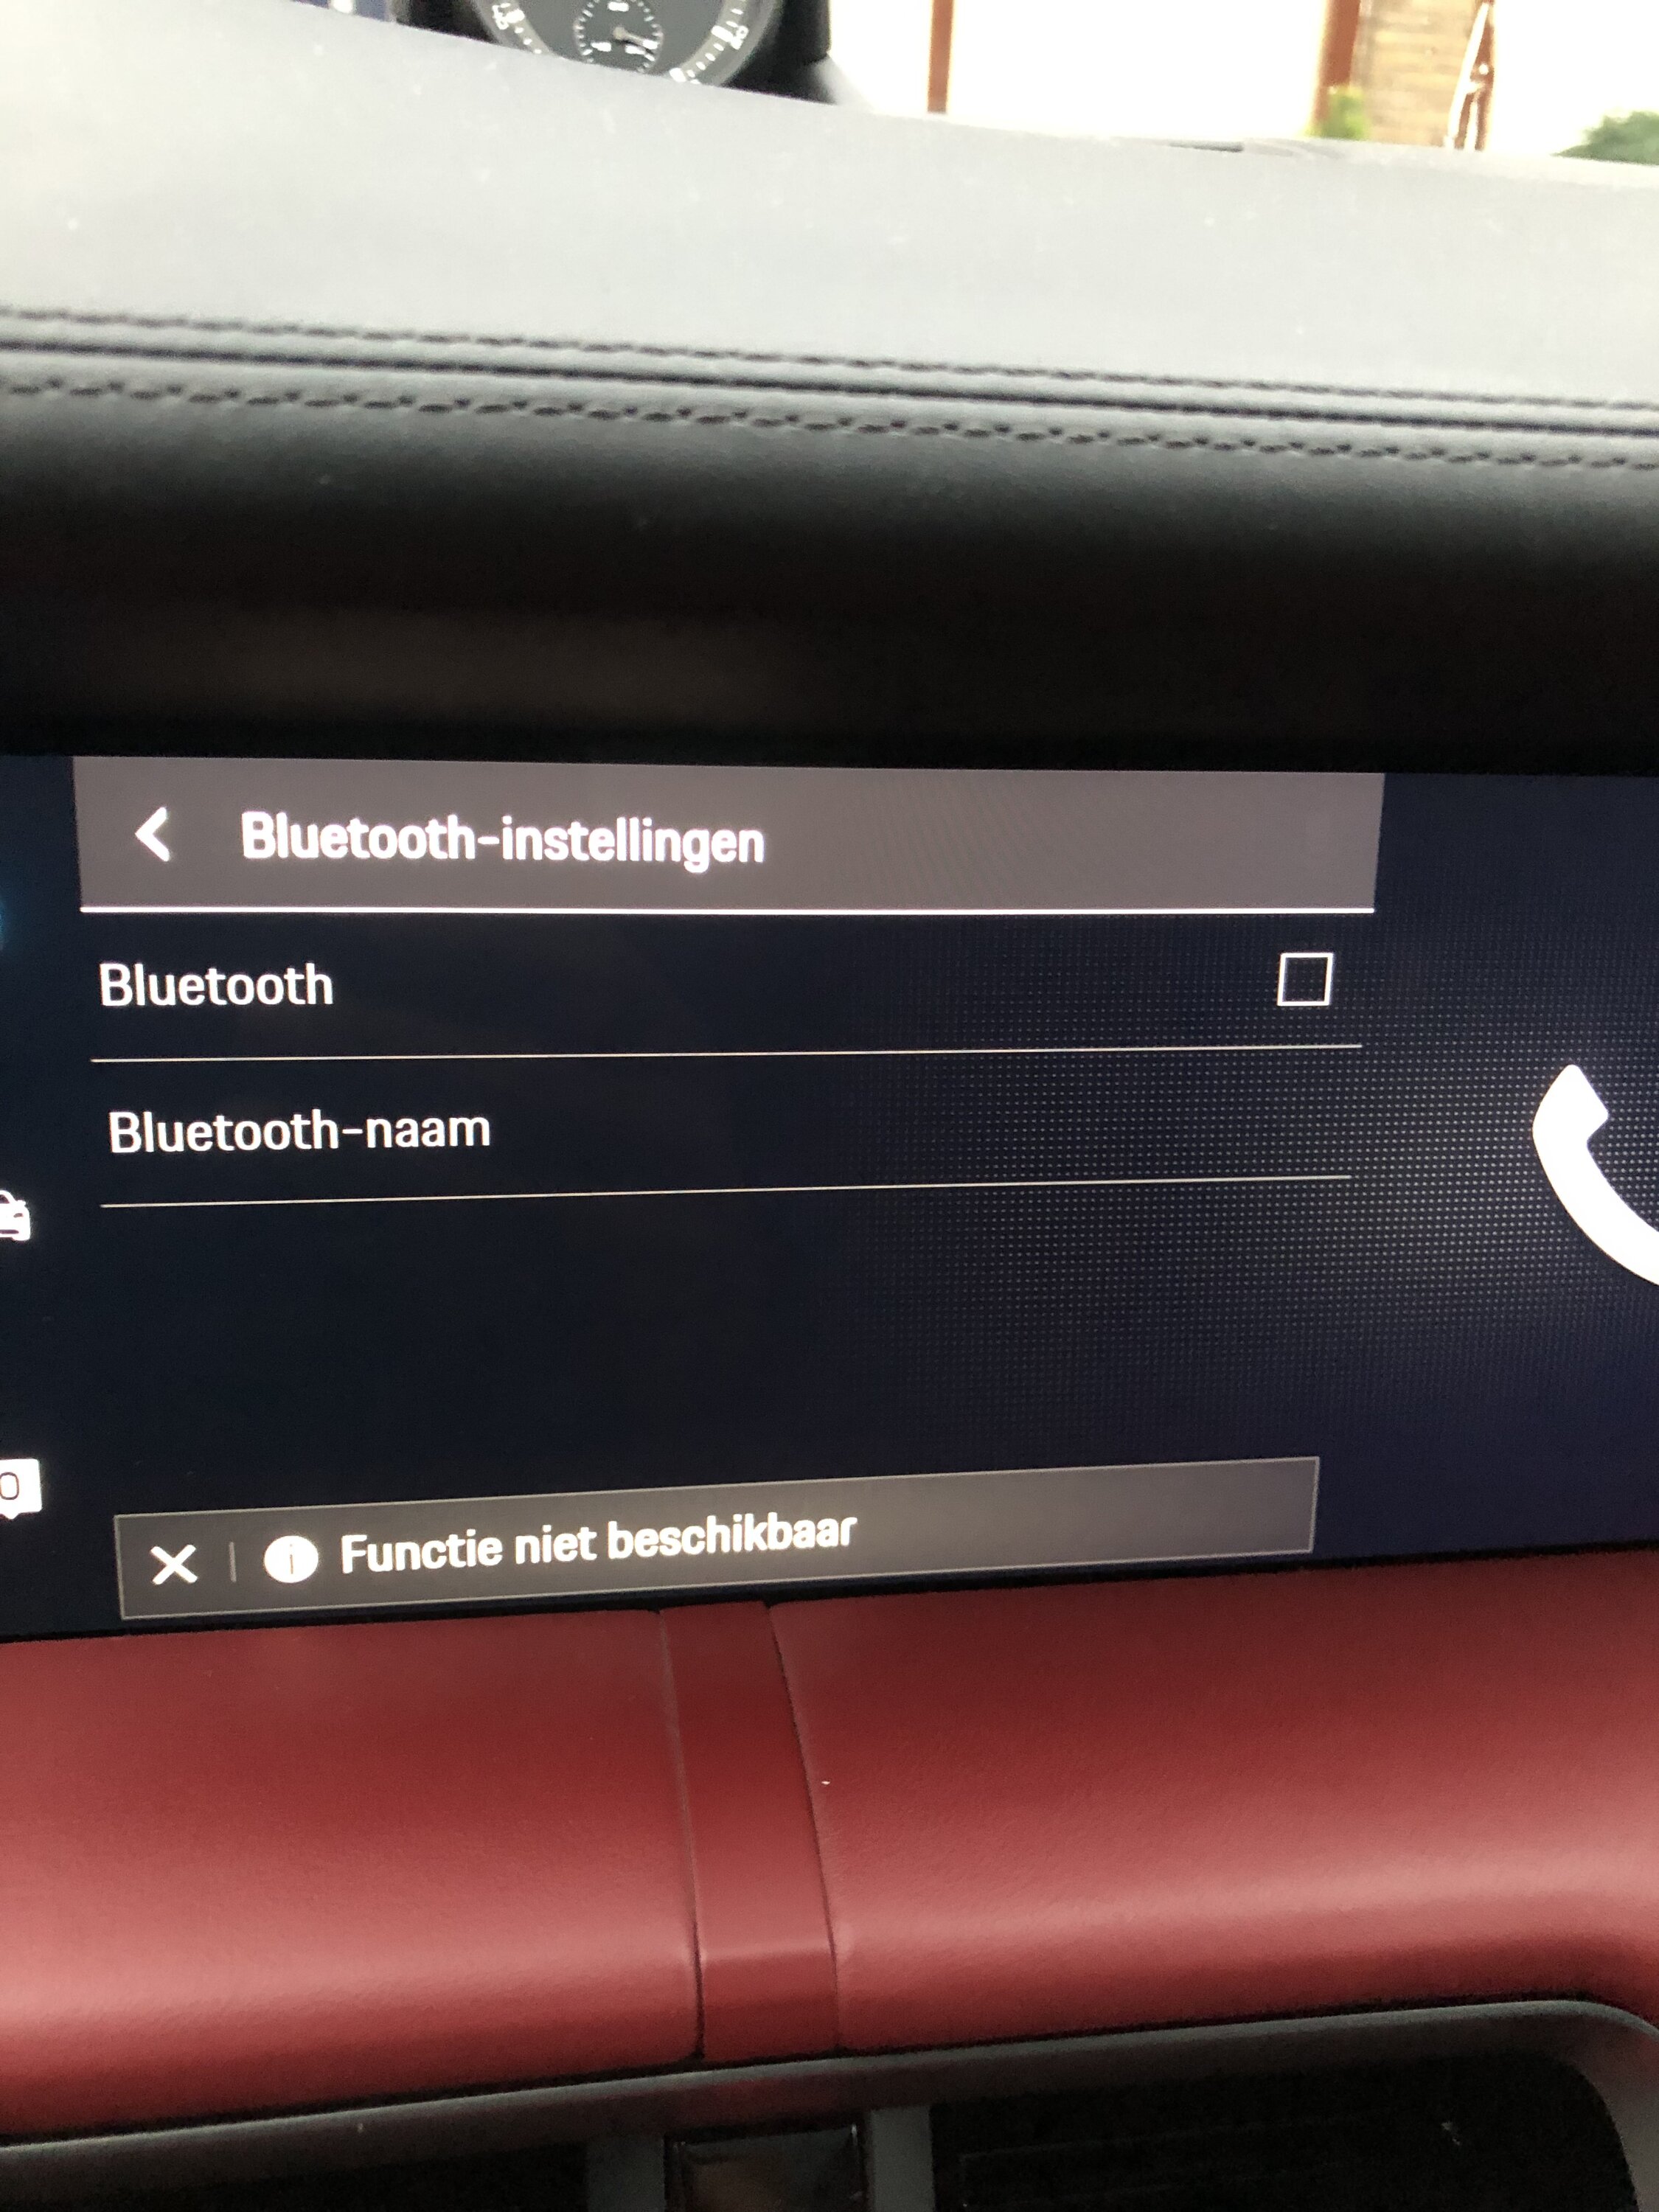 Porsche Taycan No bluetooth or wifi available 367D900F-525F-4732-8AD0-BE4598D265DD